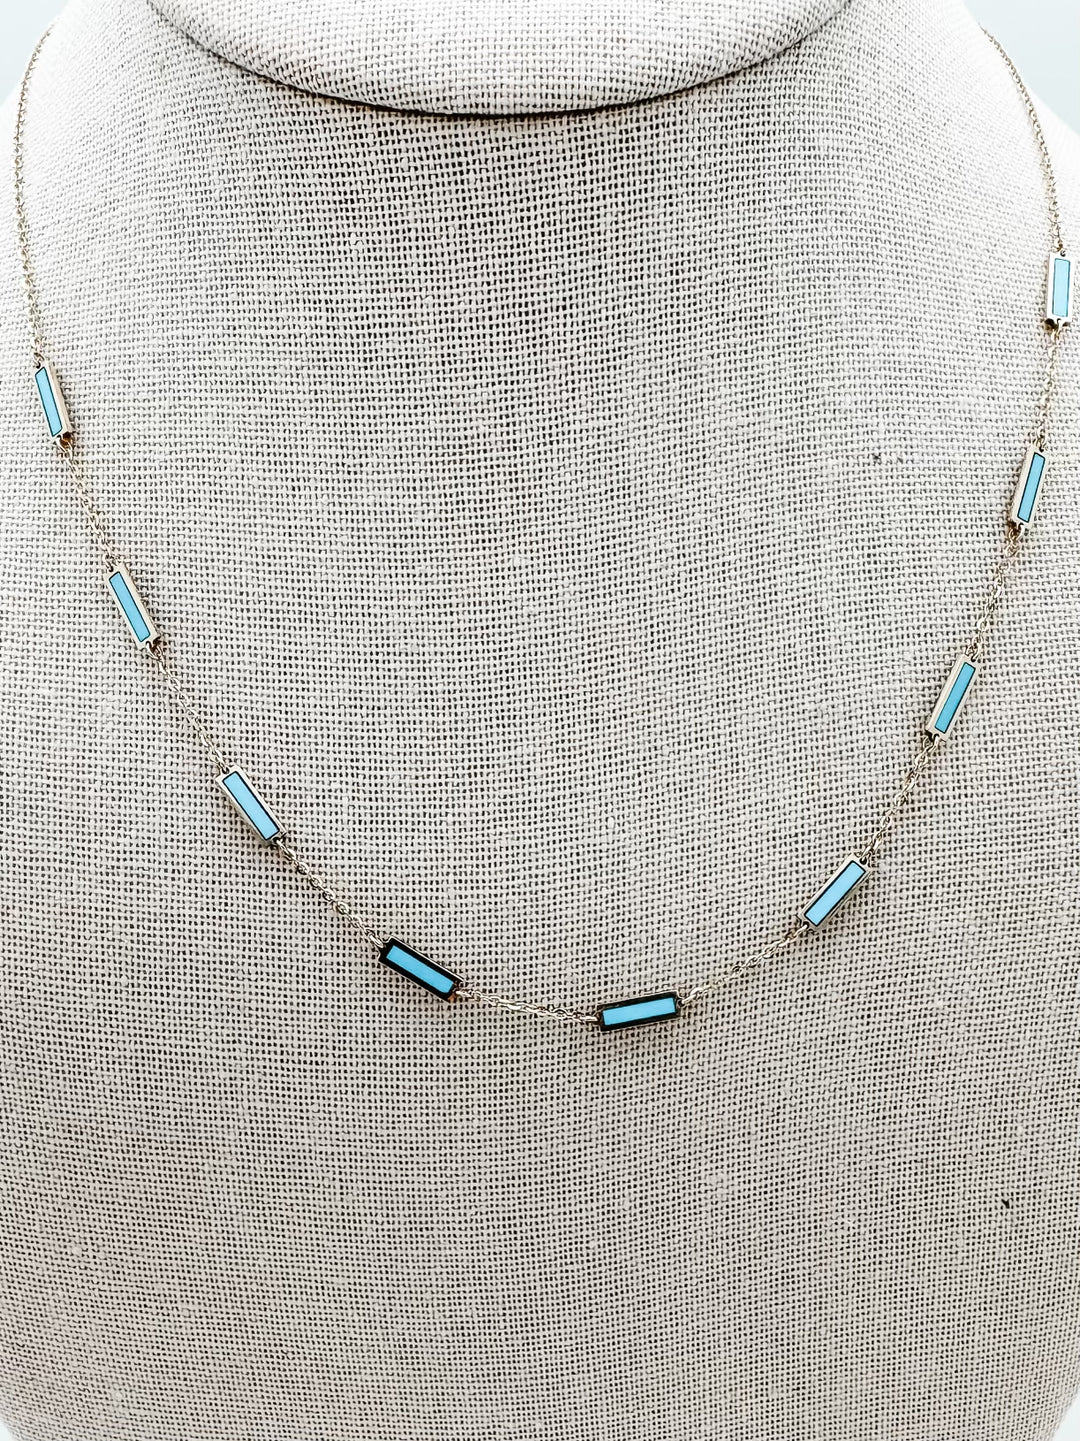 Turquoise Bar Chain Necklace